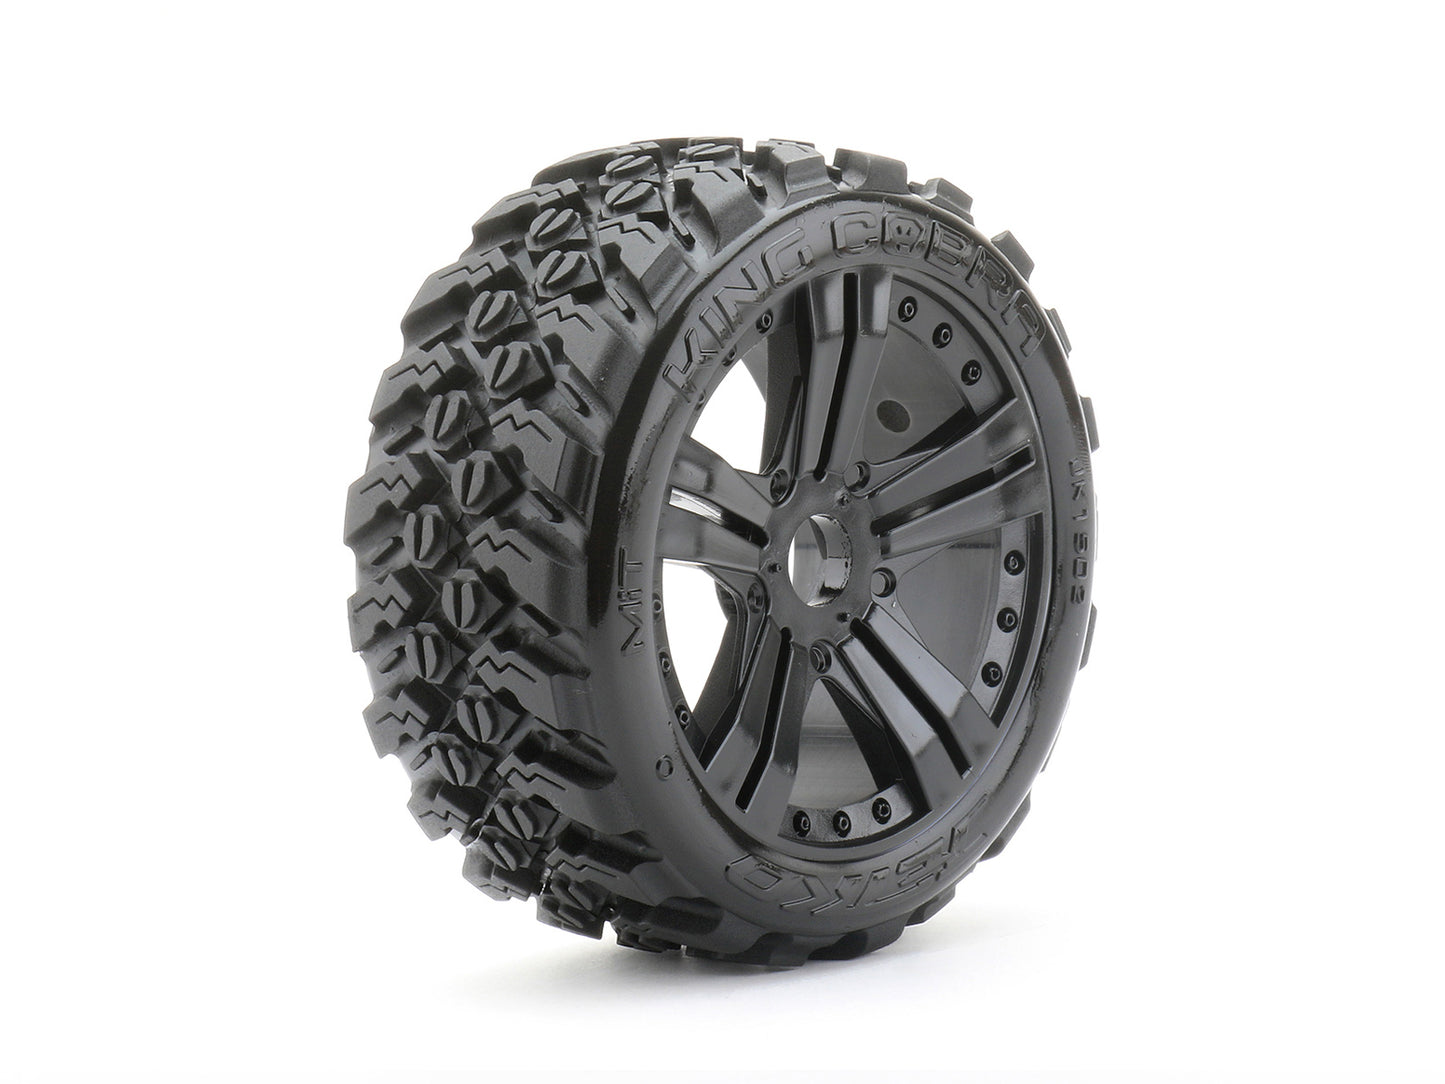 1/8 Buggy King Cobra Tires Mounted on Black Claw Rims, Medium Soft, Belted (2)